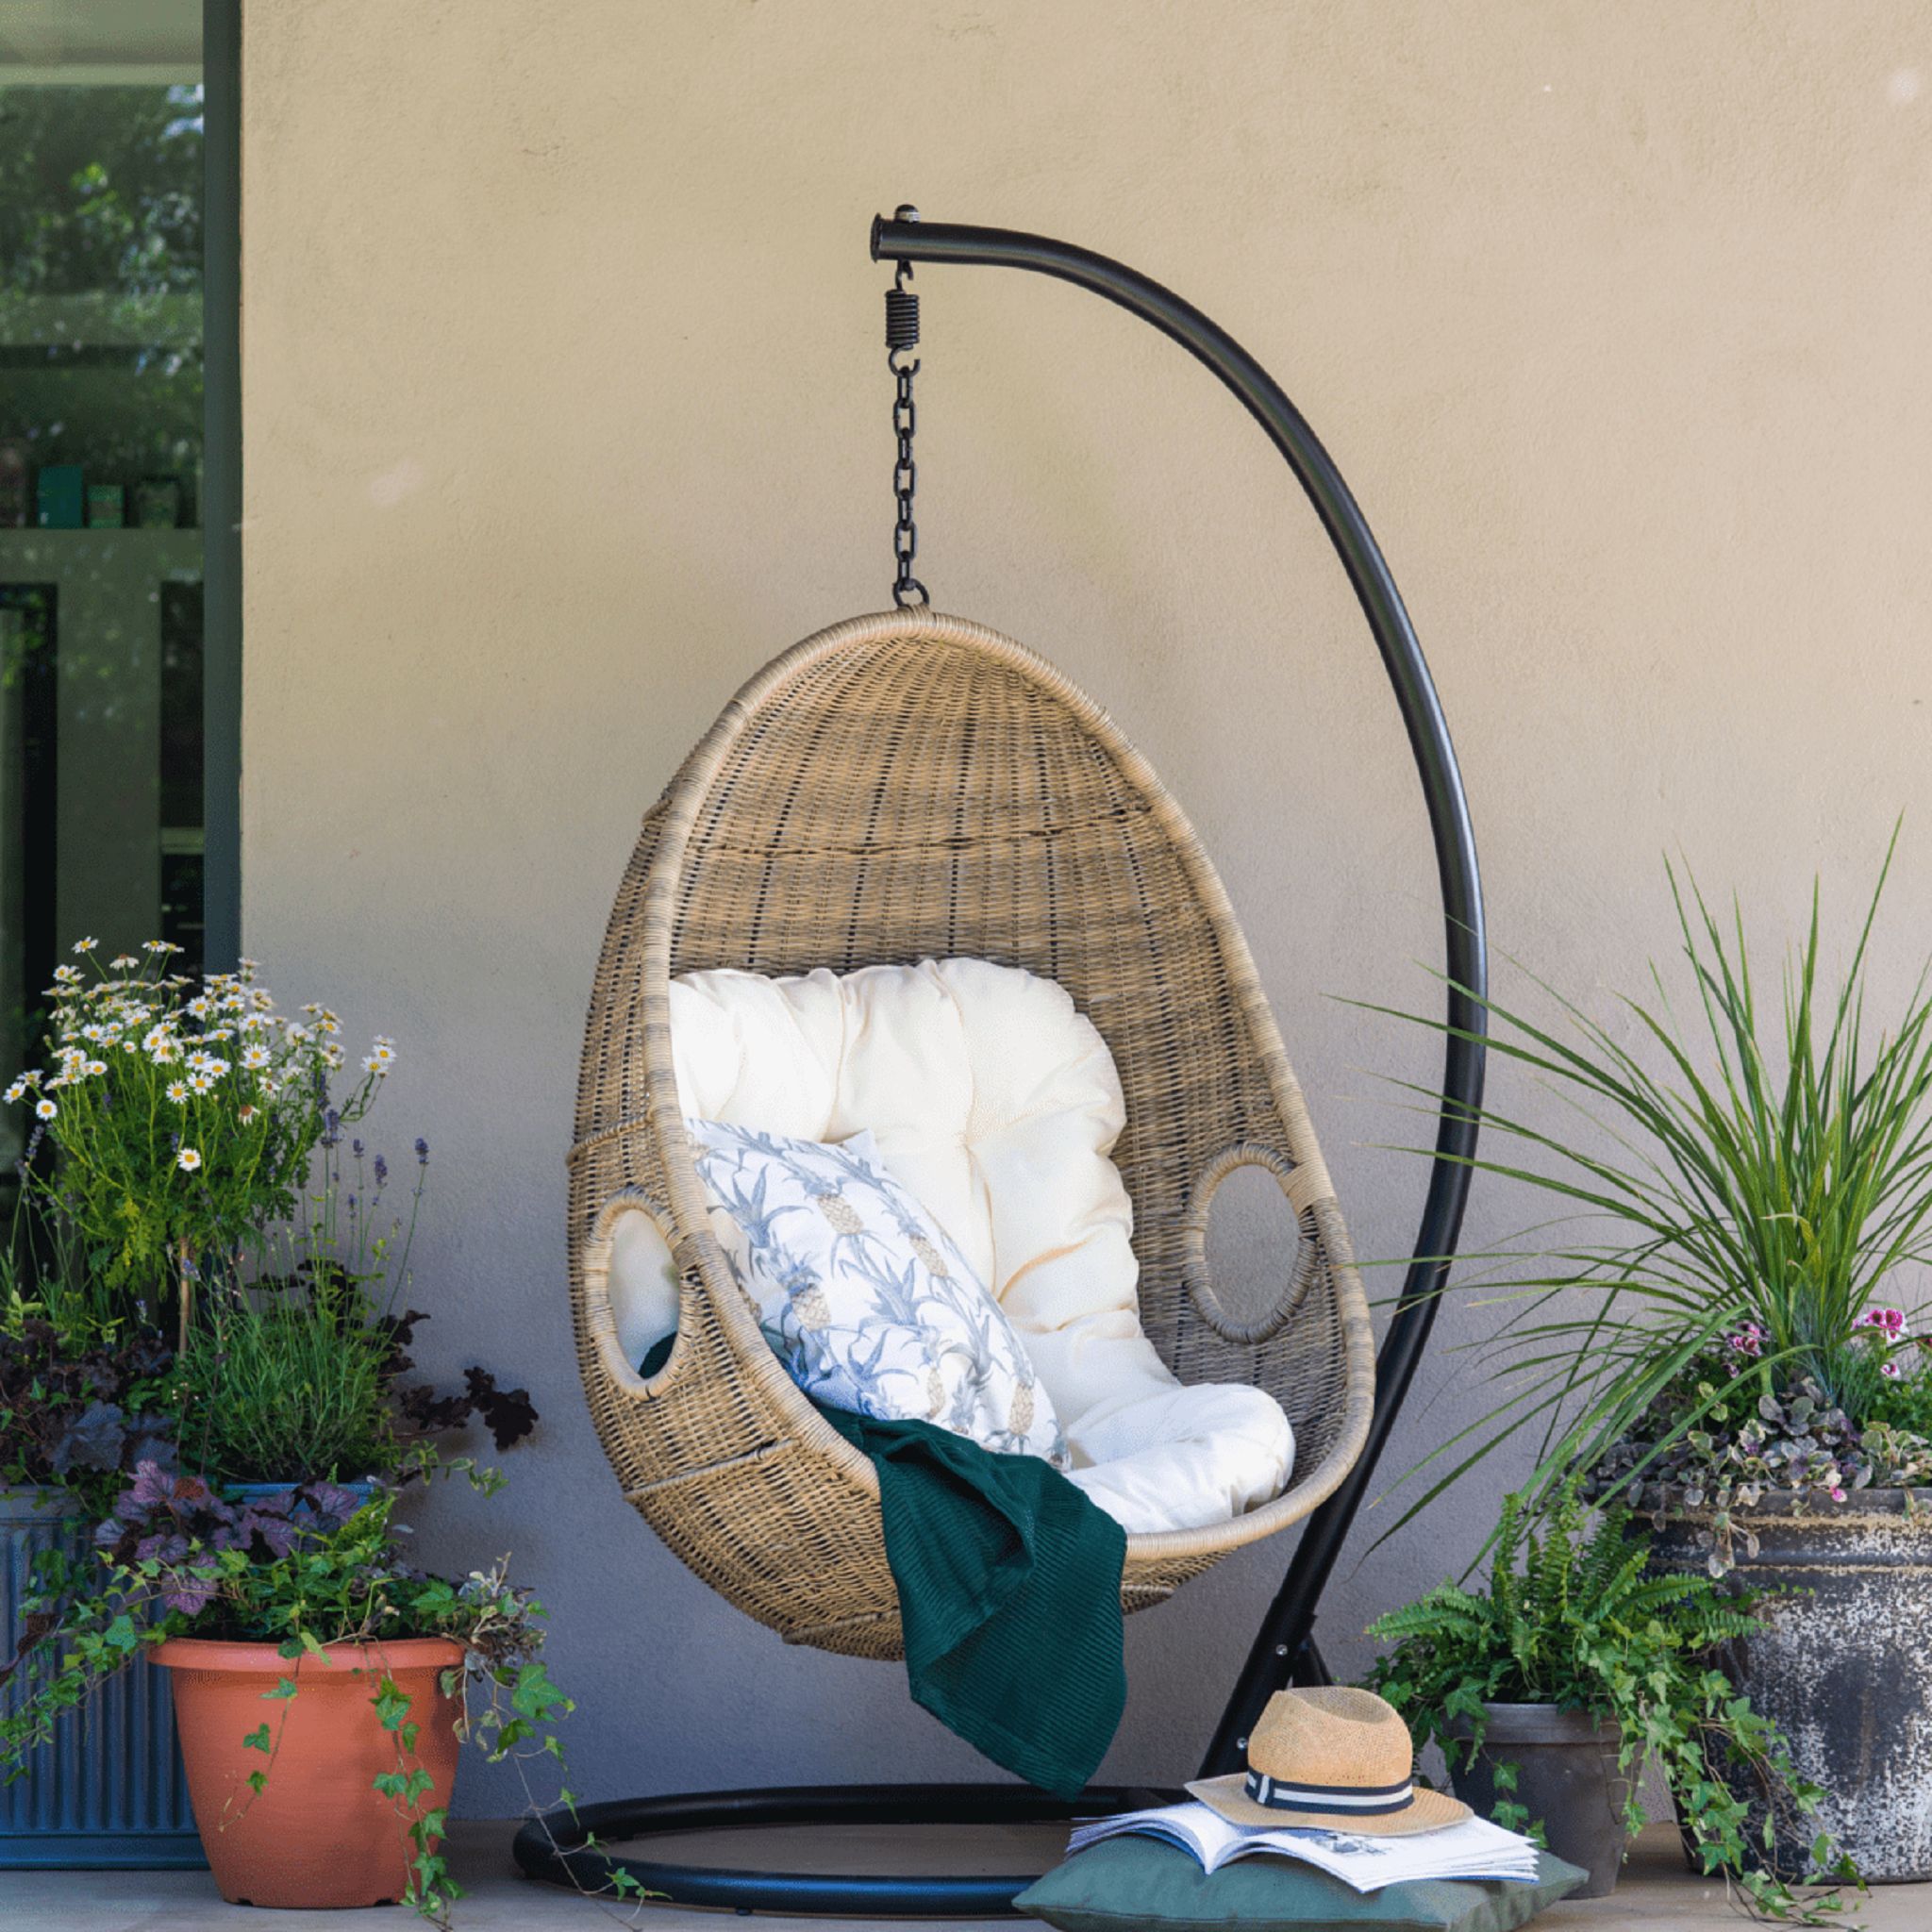 2 PAXTON SWINGING EGG CHAIR WITH CREAM CUSHION